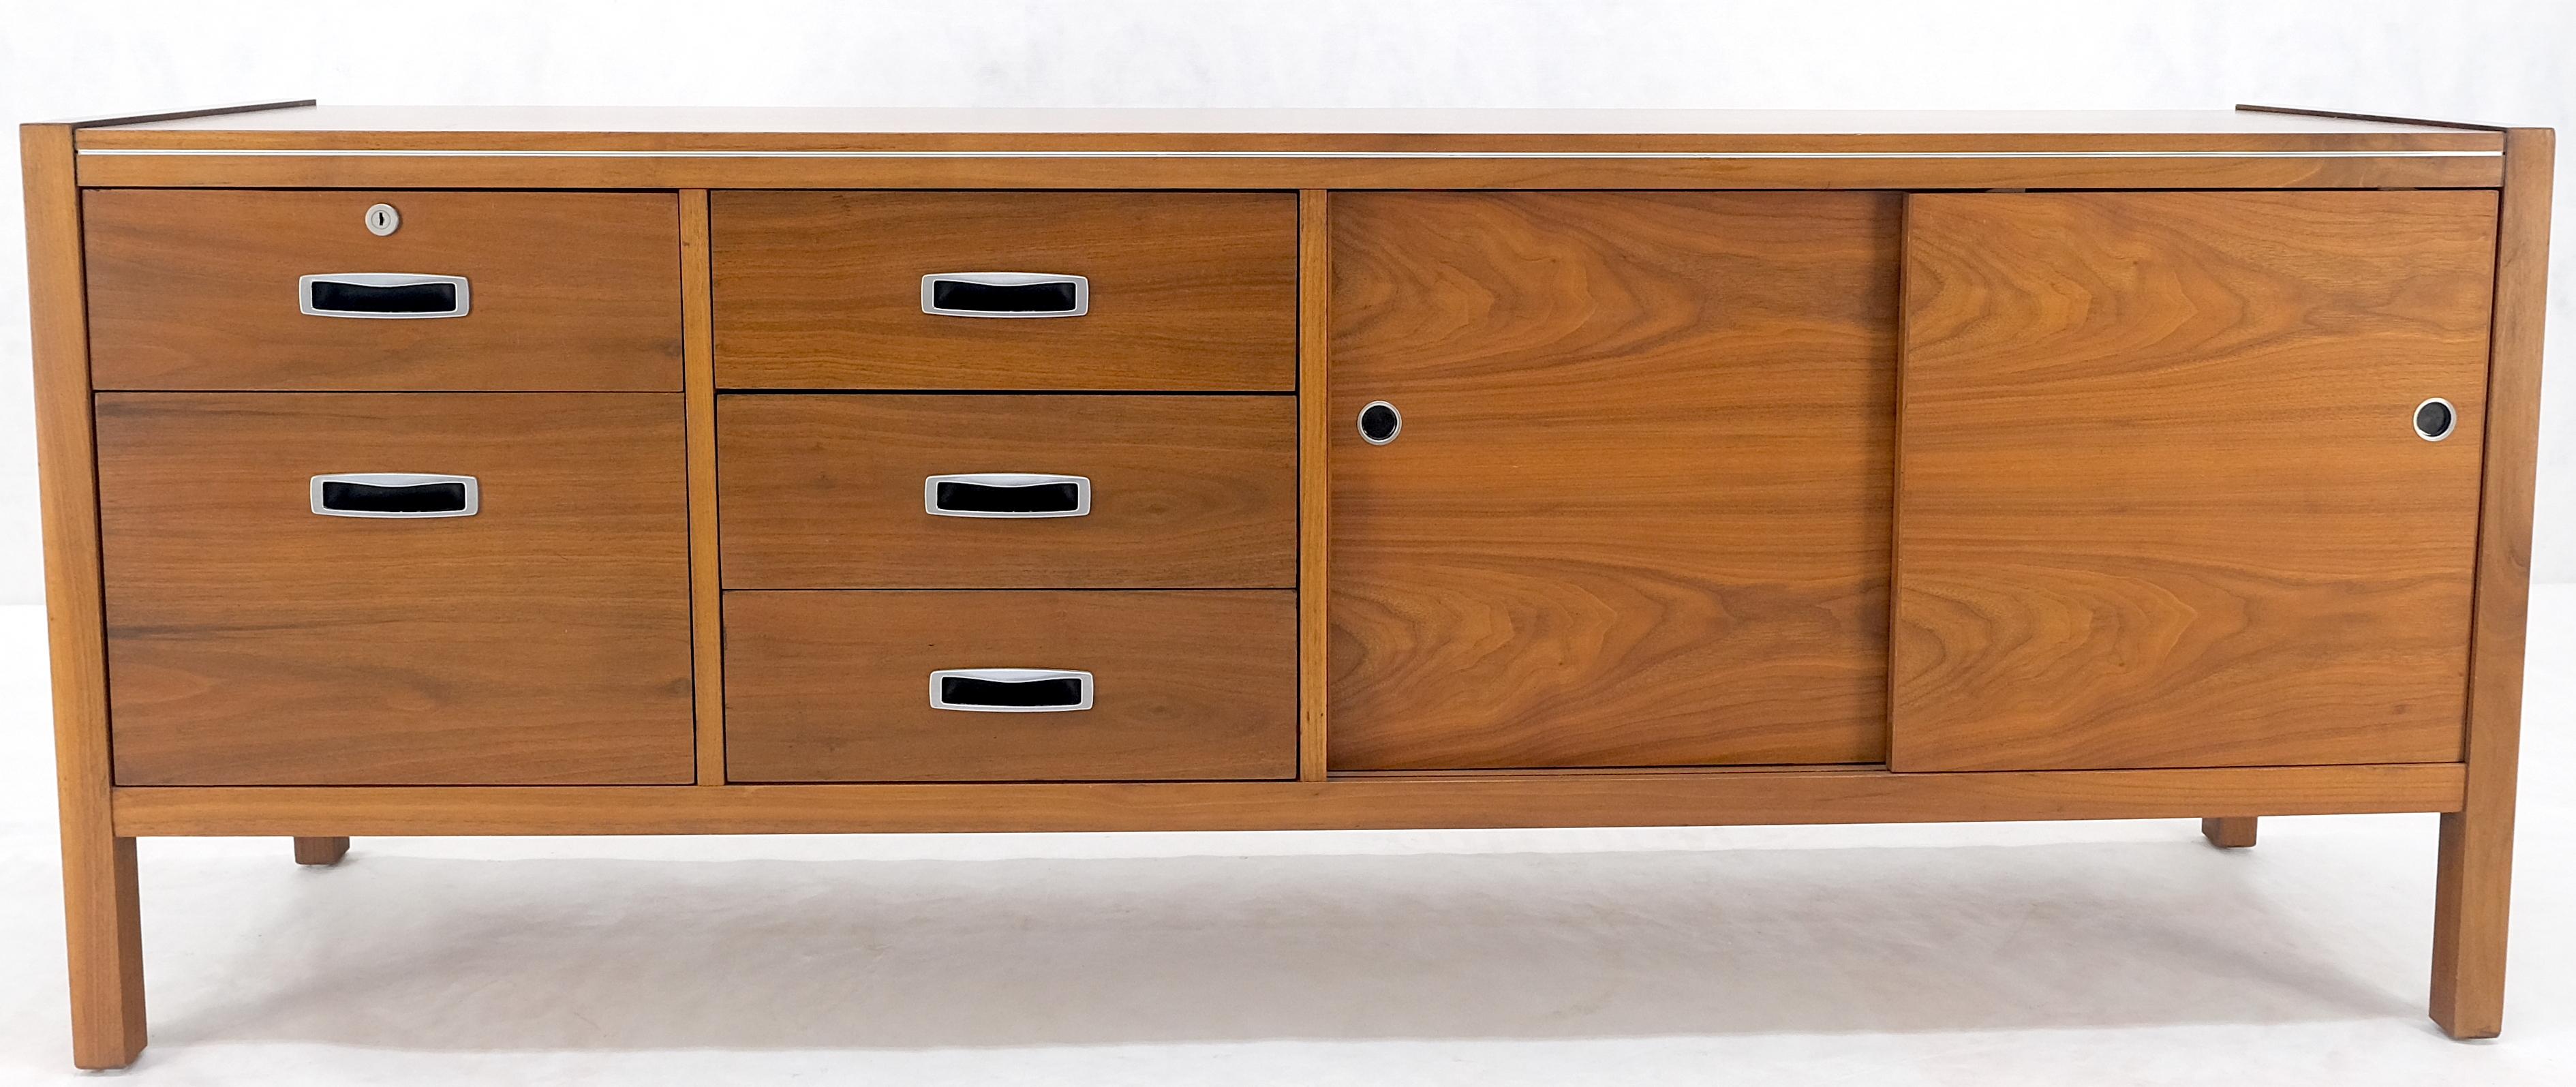 Lacquered Drexel Walnut Mid Century Modern Long Credenza Sliding Doors 5 Drawer File MINT! For Sale